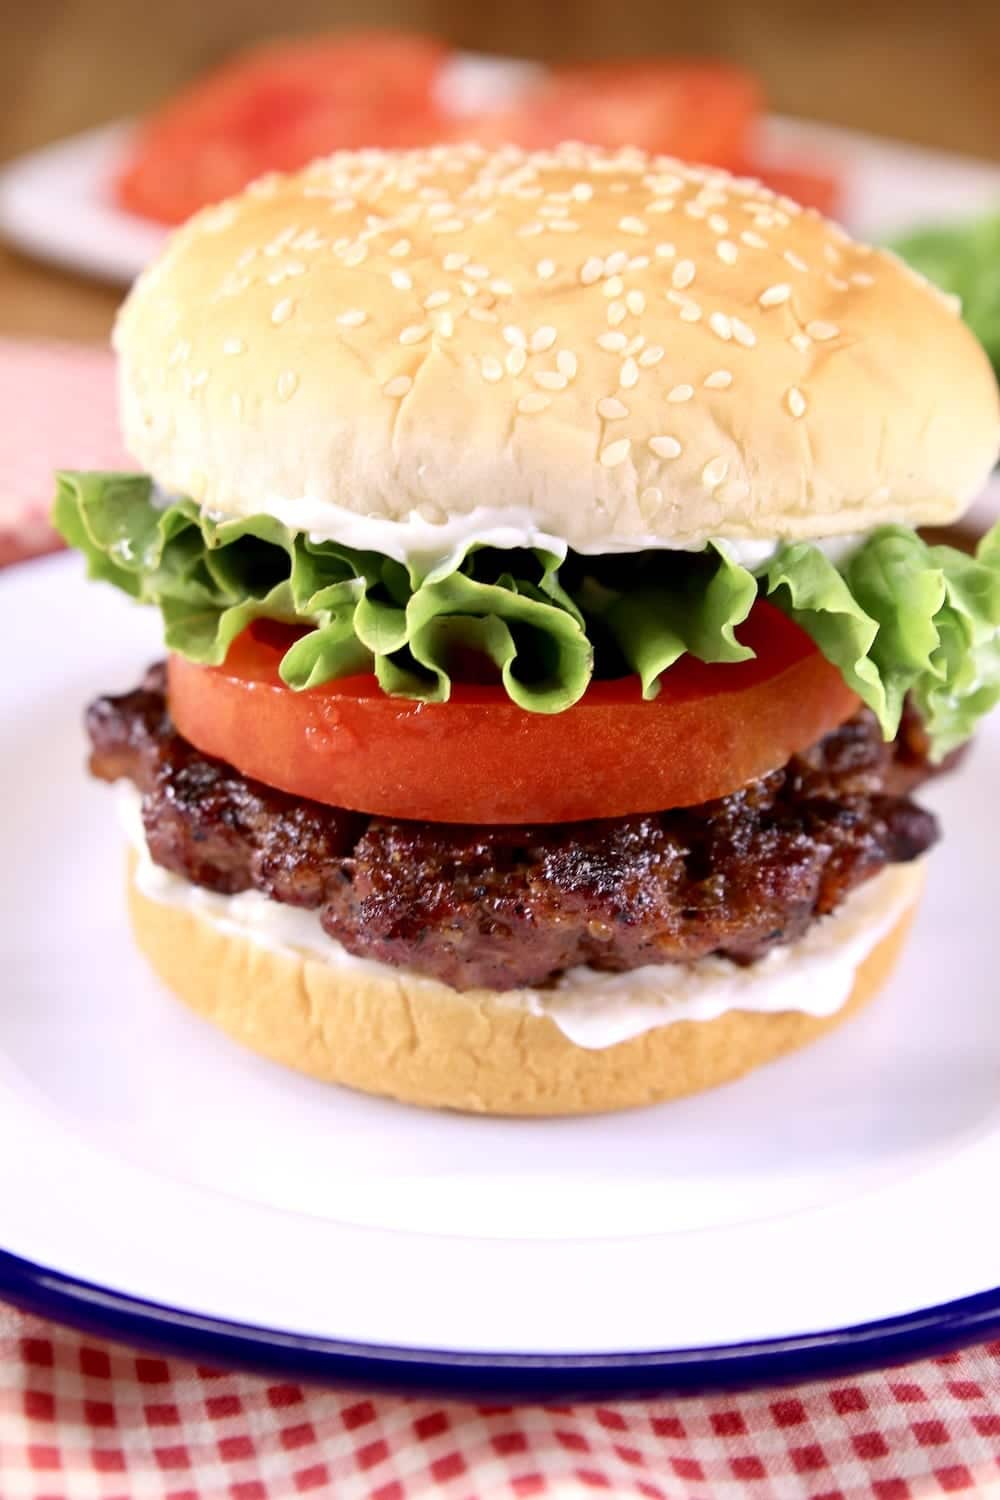 Grilled Brisket Burger on a sesame seed bun with lettuce and tomato- close up